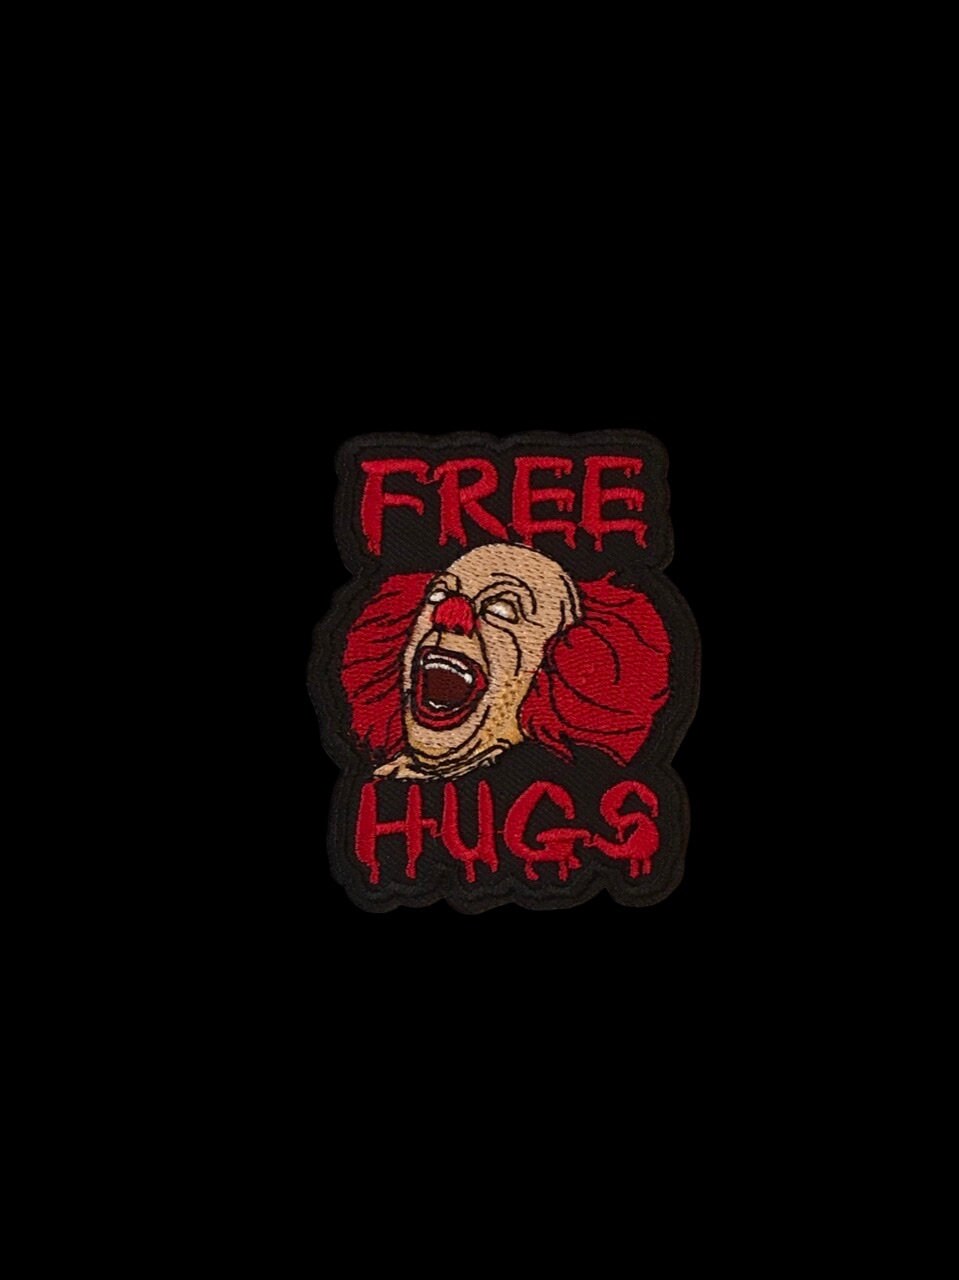 80’s Free Hugs IT Themed Horror Movie Iron on Patch Horror Movie Iron on Patch Jacket Sew on Patch Kids Patch Embroidered Patch